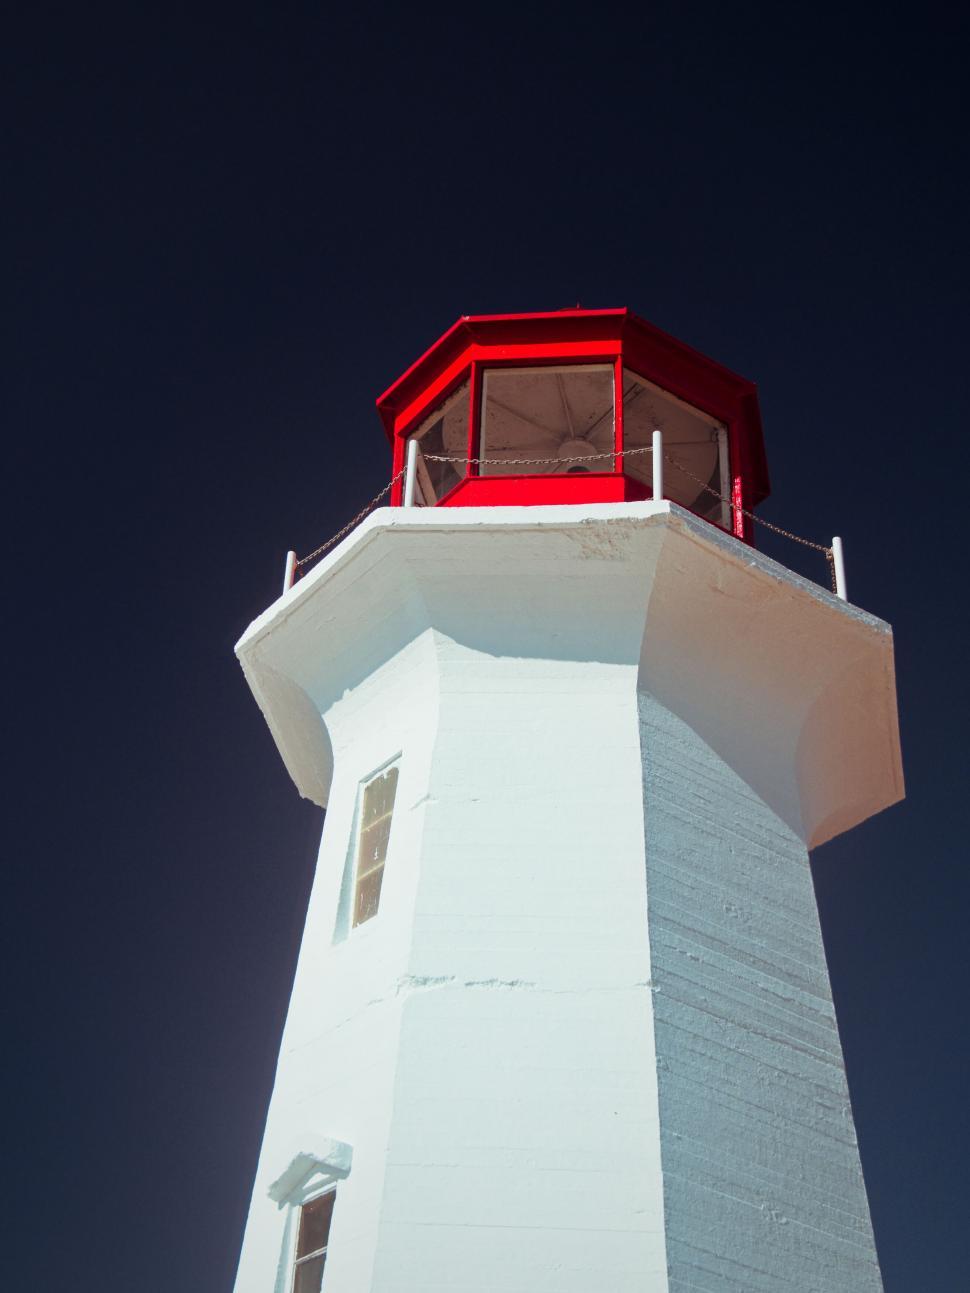 Free Image of White lighthouse with red top against night sky 